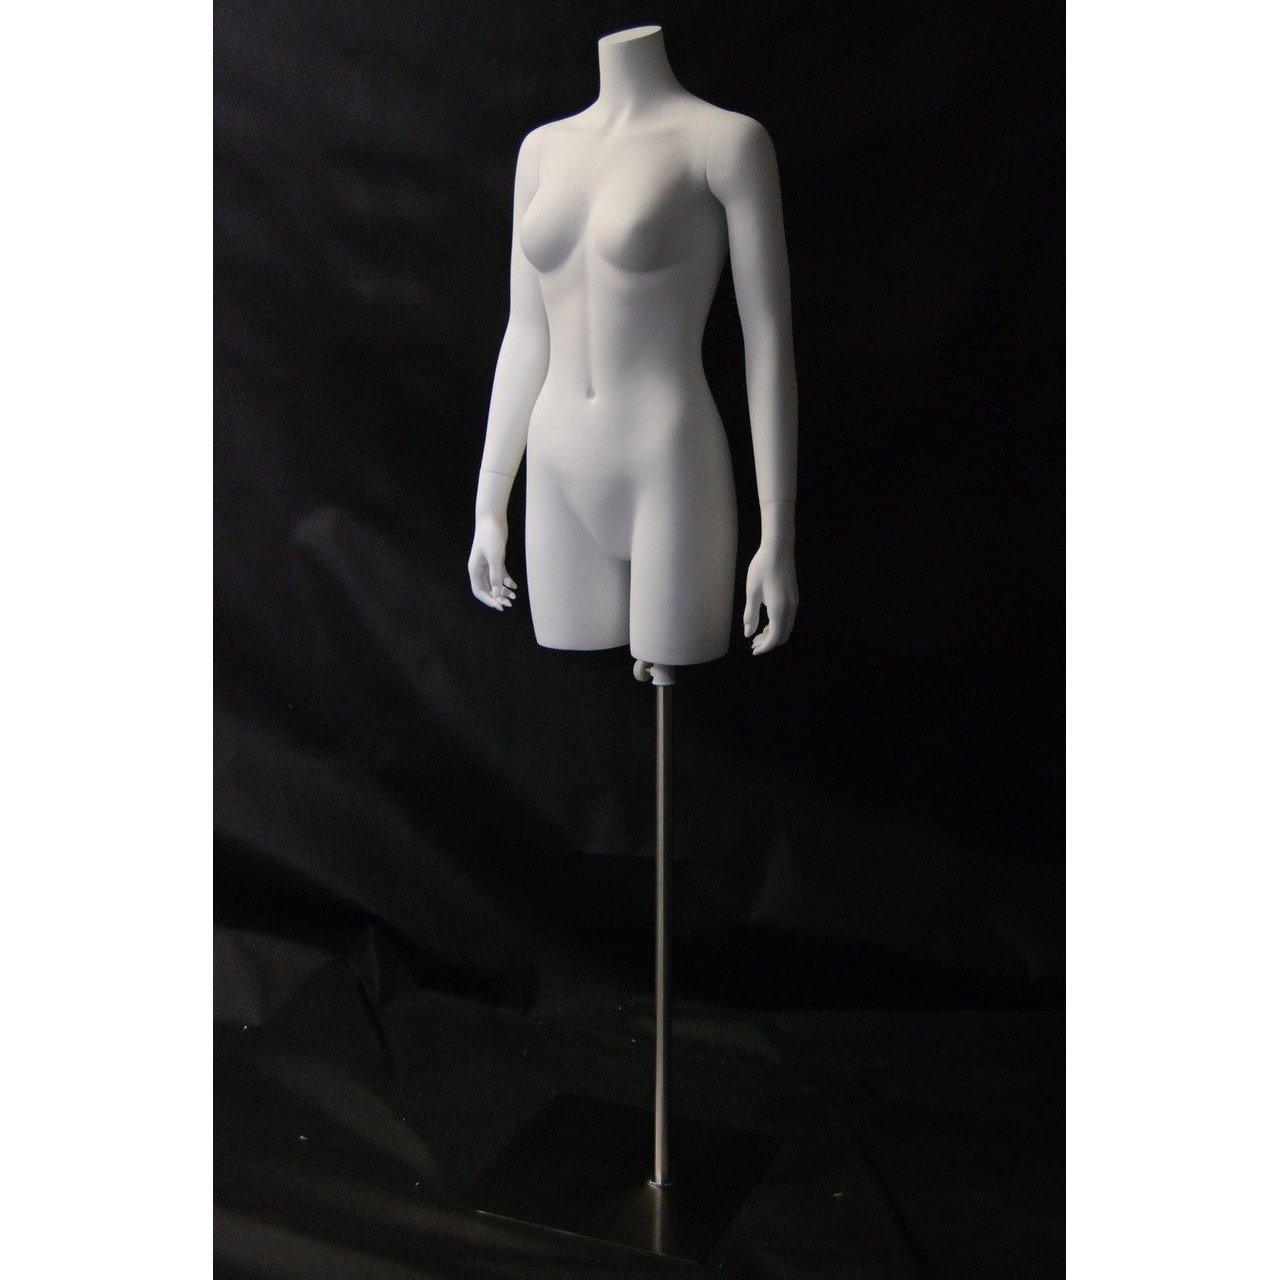 Male Professional Dress Form & Sewing Mannequin - Dress Forms USA